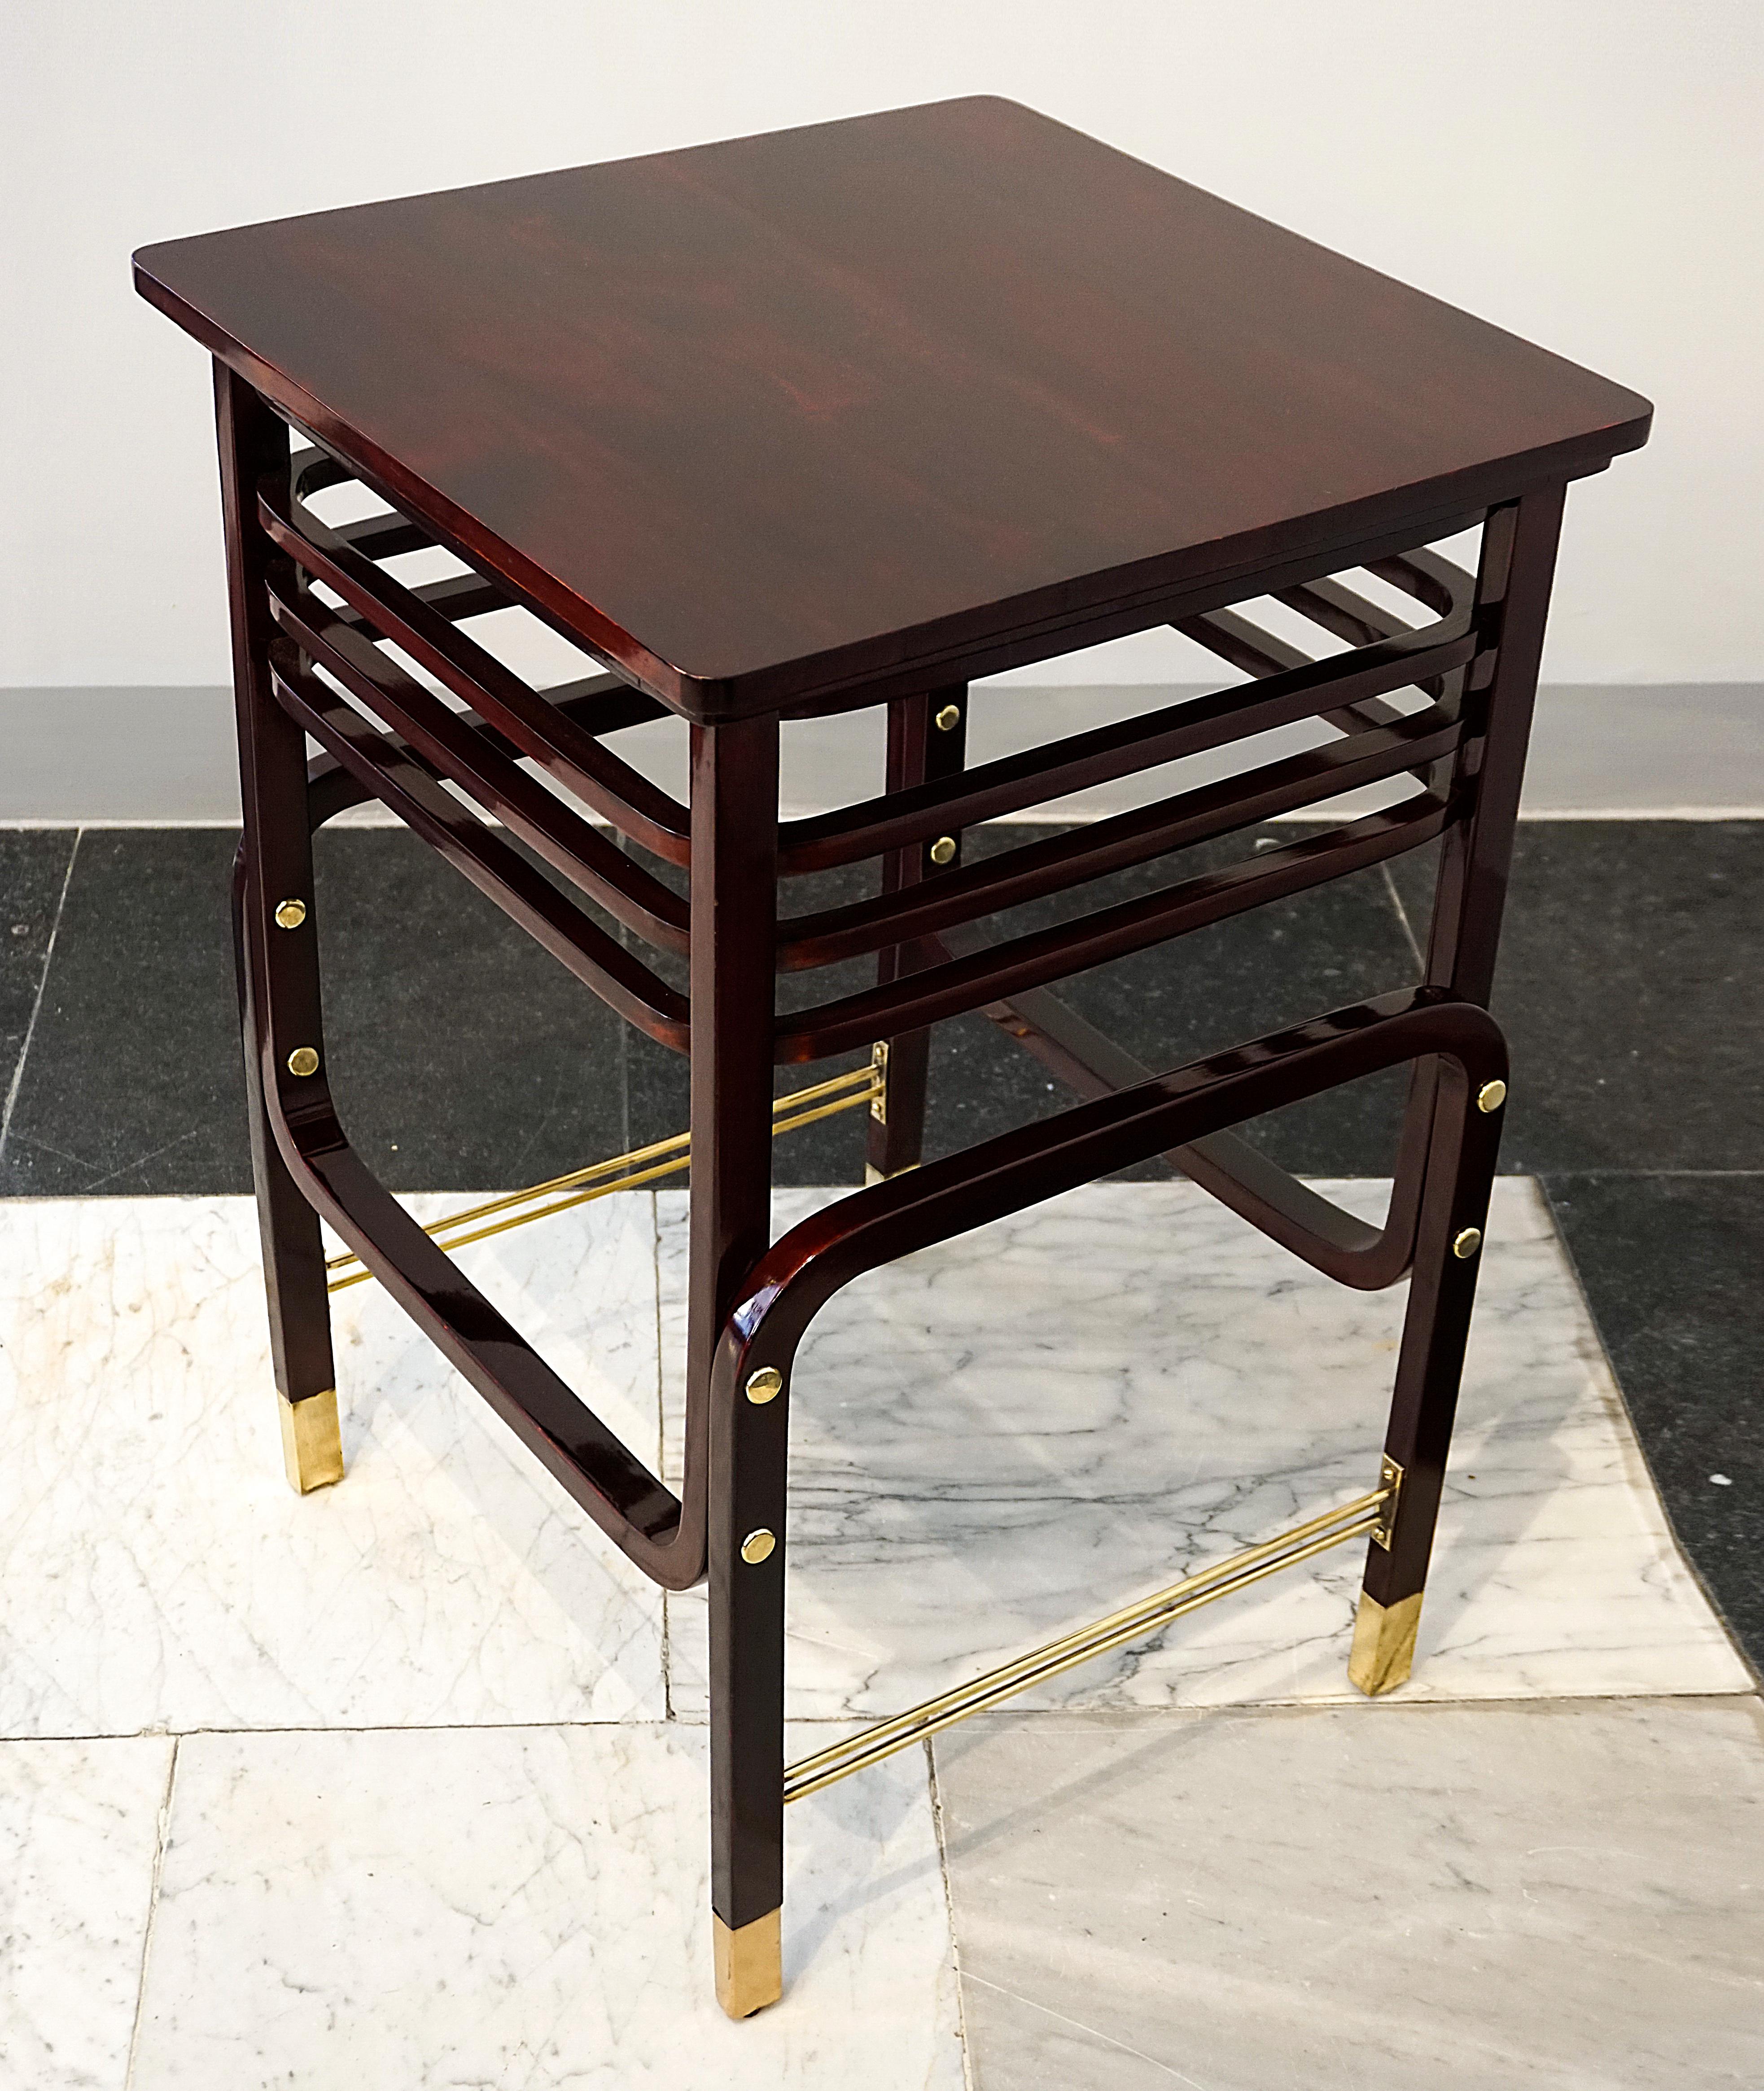 Small table with elegantly curved bentwood elements: two U-shaped bent struts with the ends parallel as legs tied to the corners of the table top, two further U-shaped bent struts opposite, with ends touching the floor, attached to the legs of the